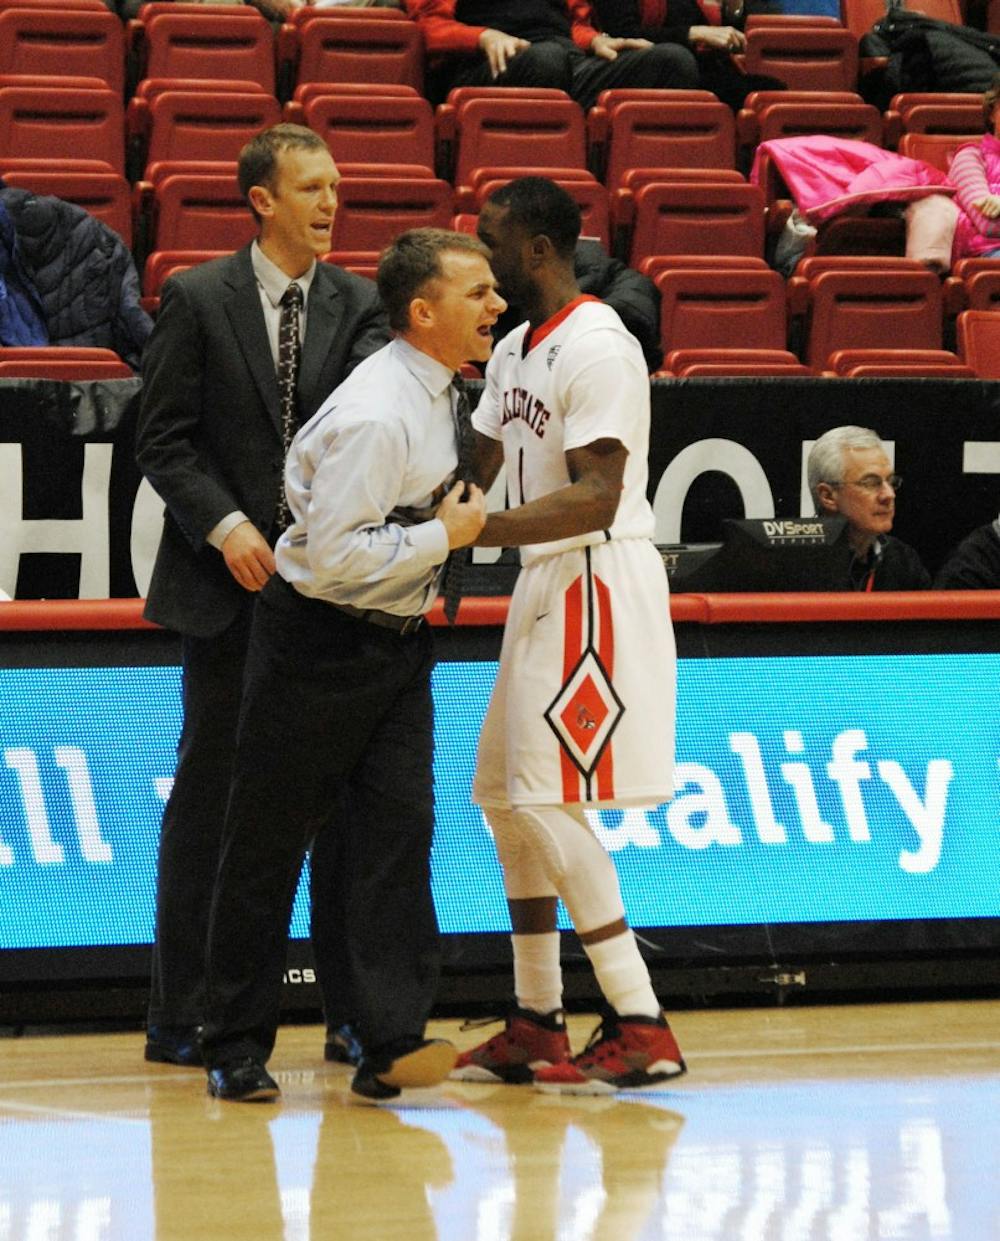 Head coach James Whitford is held back by Freshmen guard Francis Kiapway after his technical foul during the game against Buffalo on Feb. 4 at Worthen Arena. DN PHOTO ALLISON COFFIN